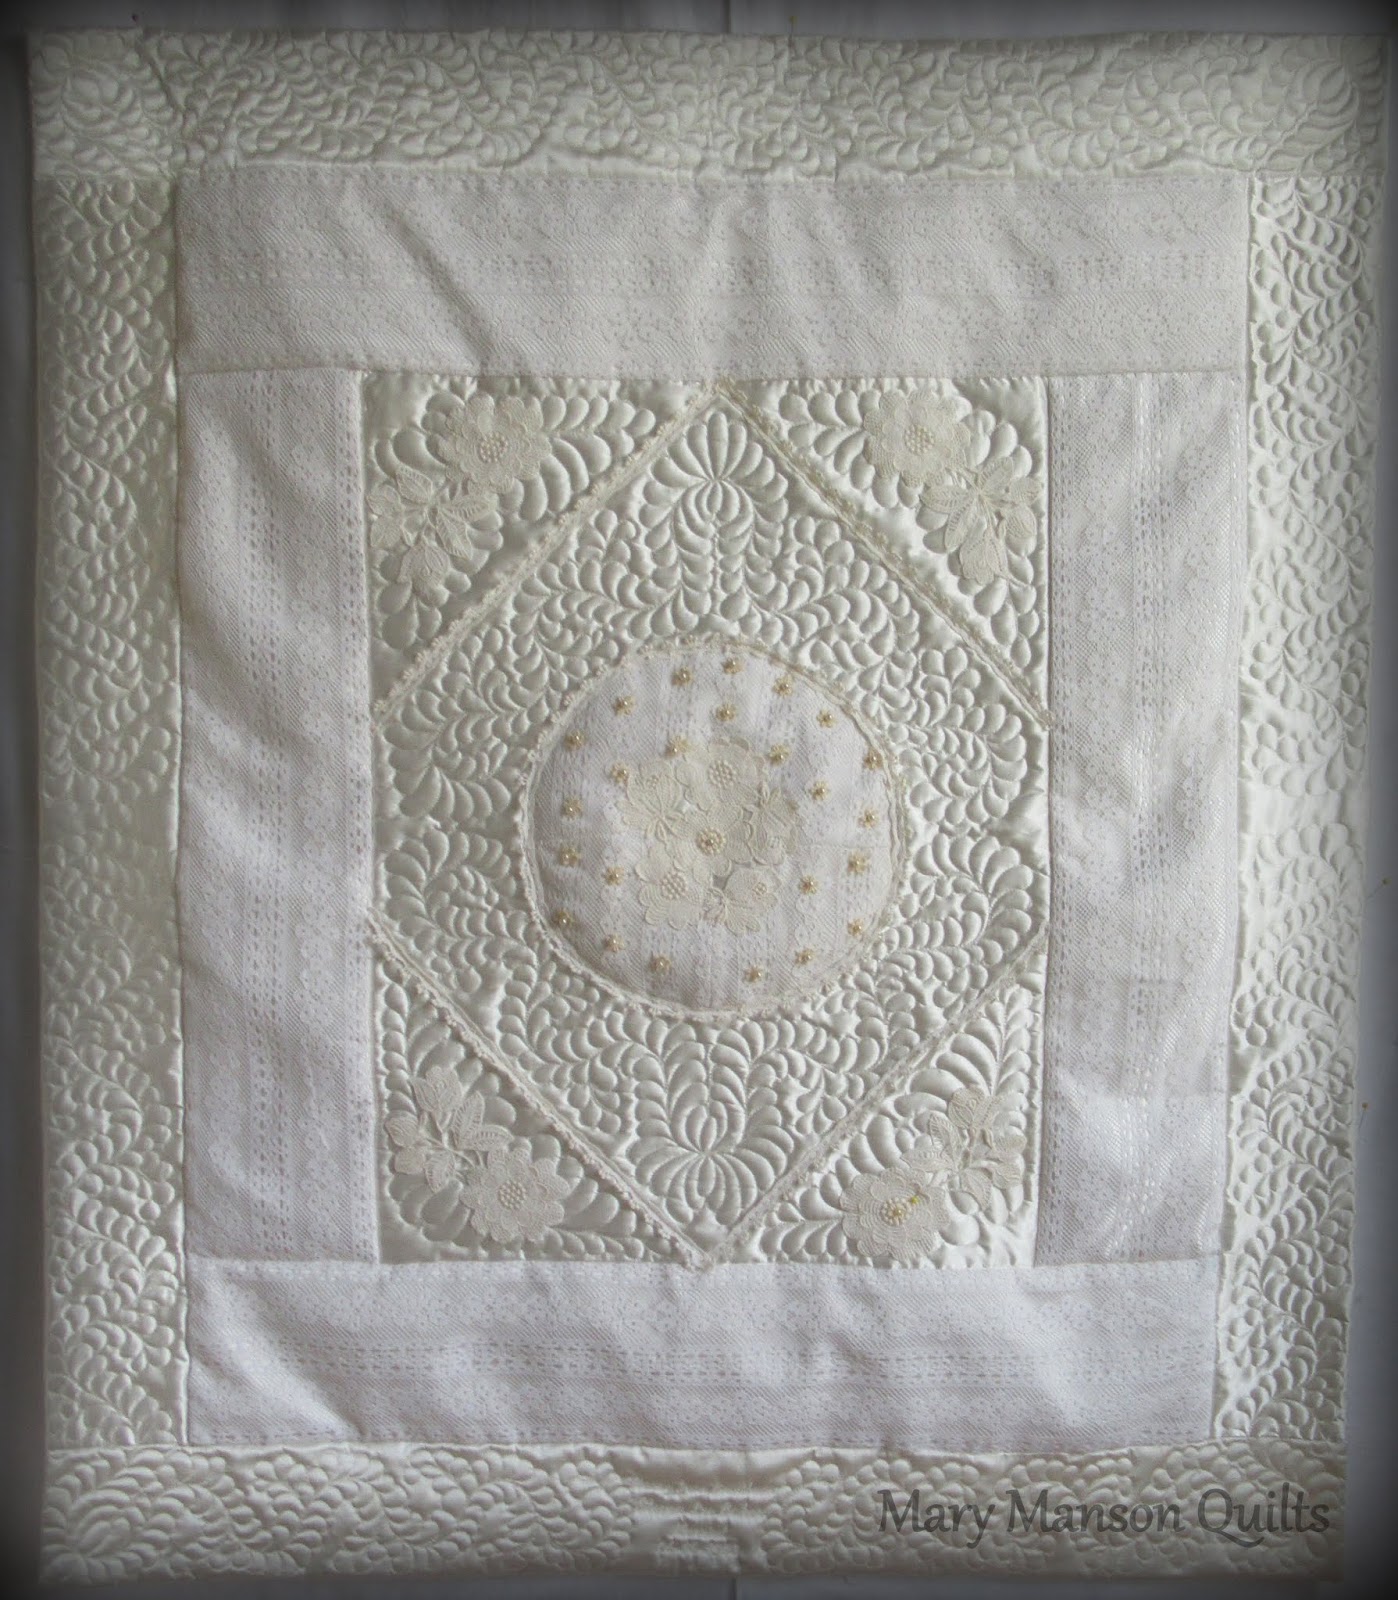 Mary Manson Quilts Wedding Dress Quilt for Nancy